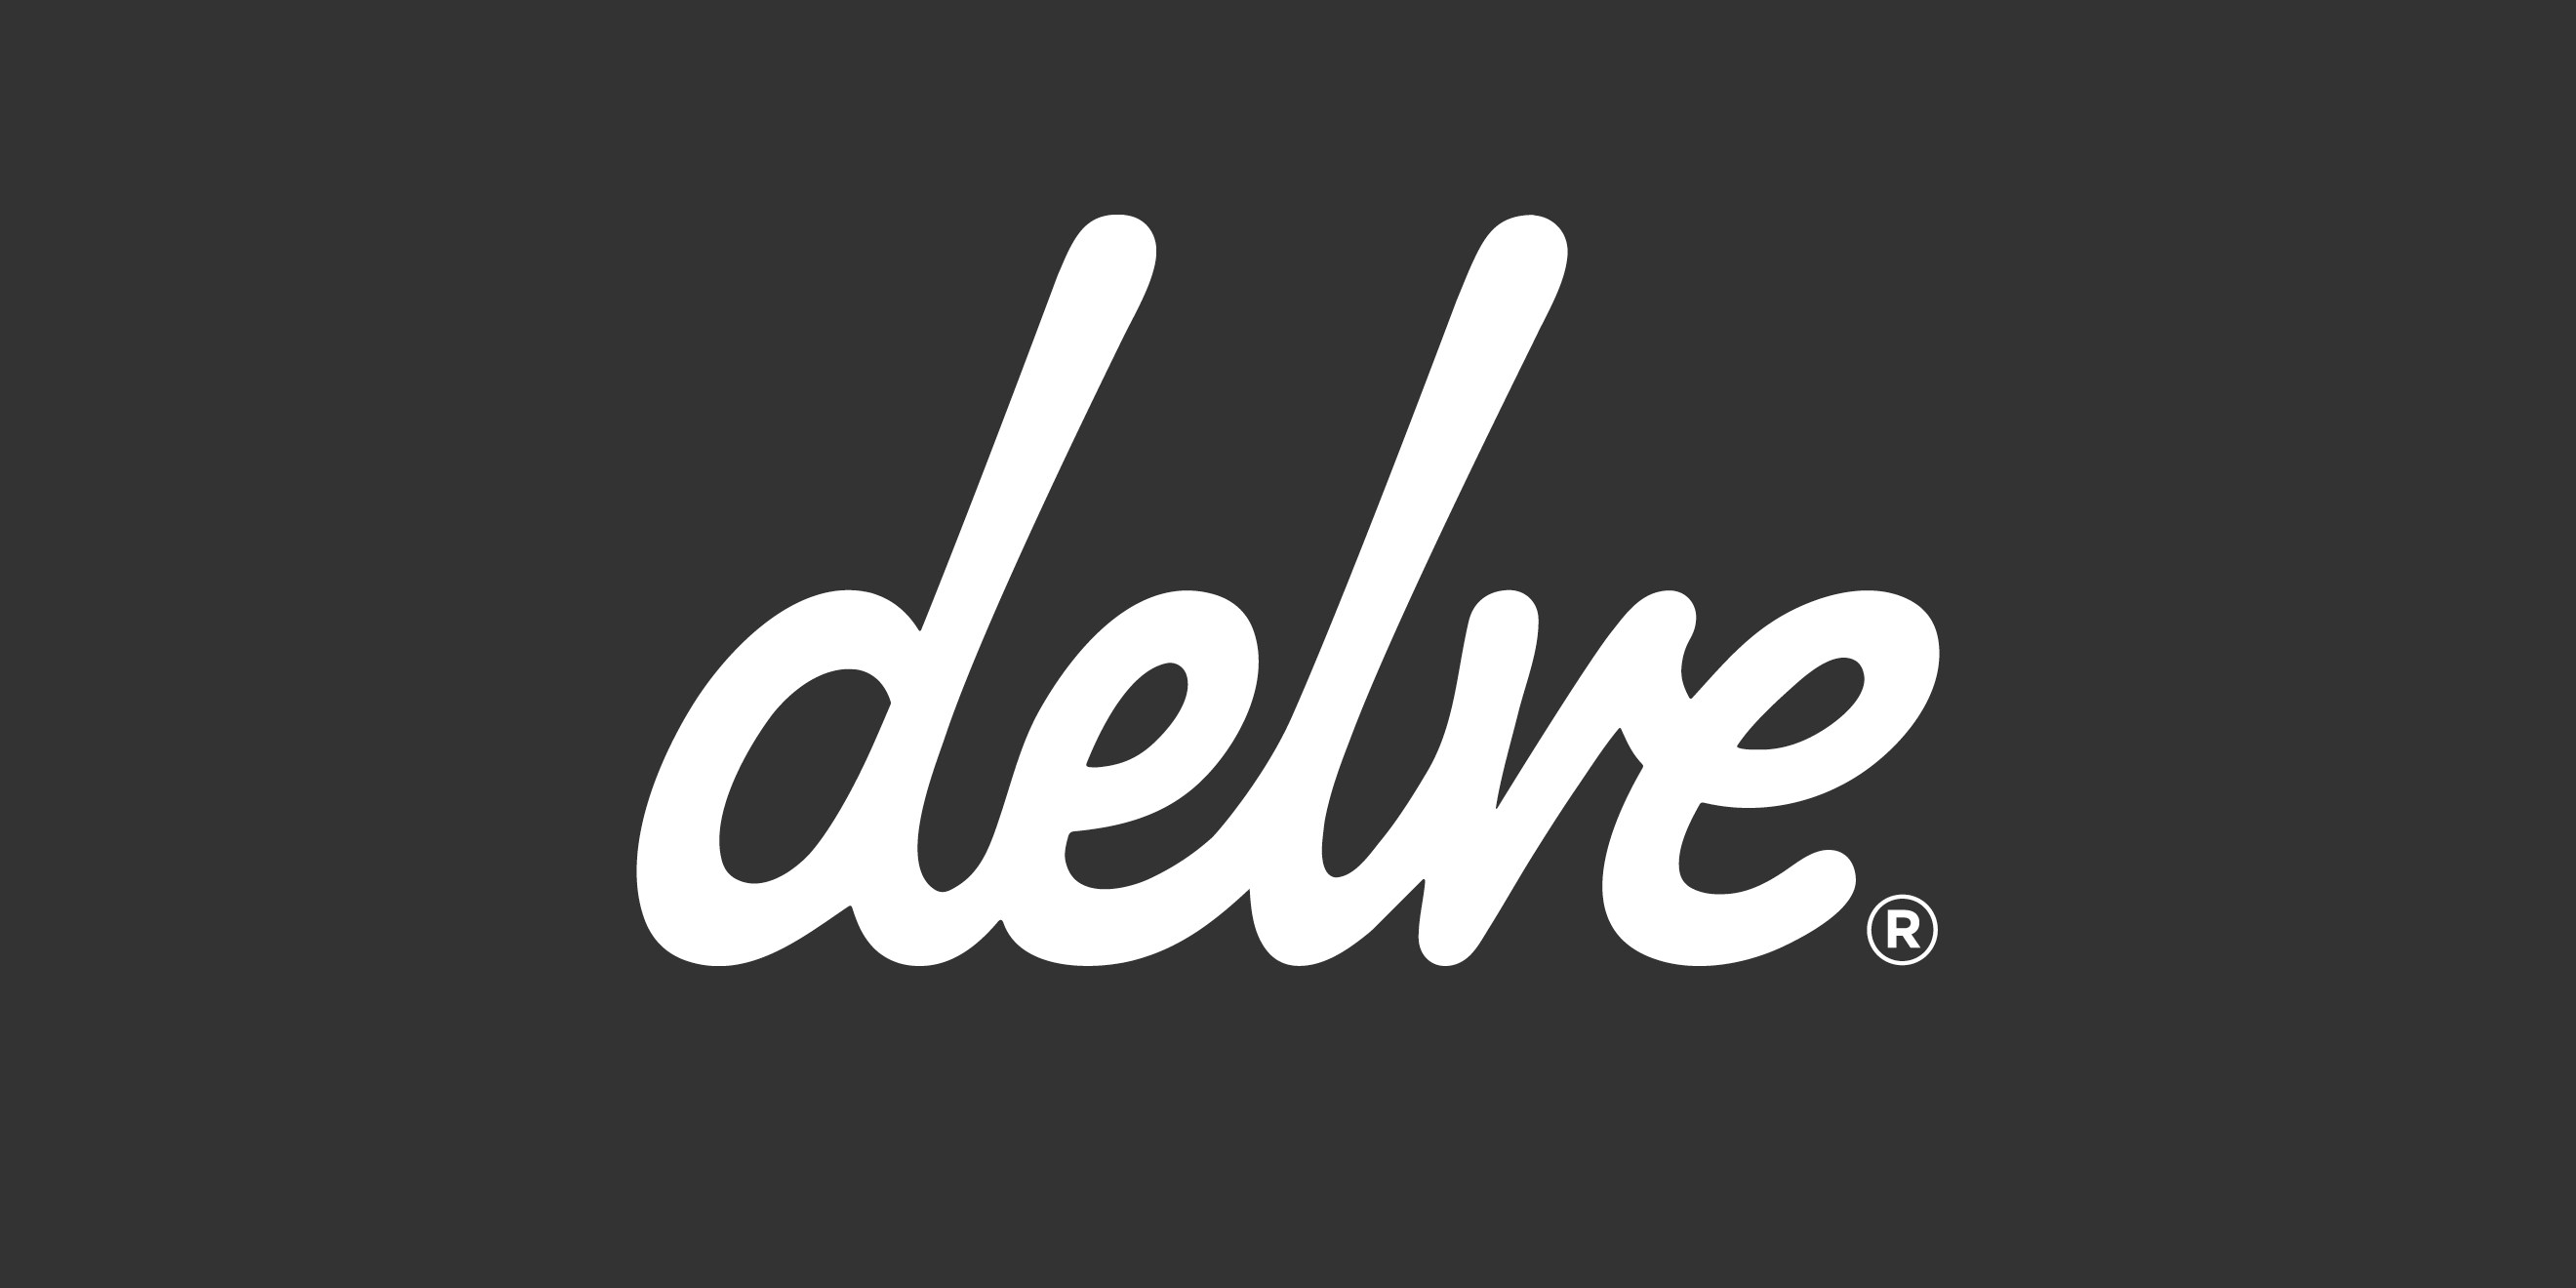 Delve Logo - delve: The free weekly film newsletter | Human After All design agency